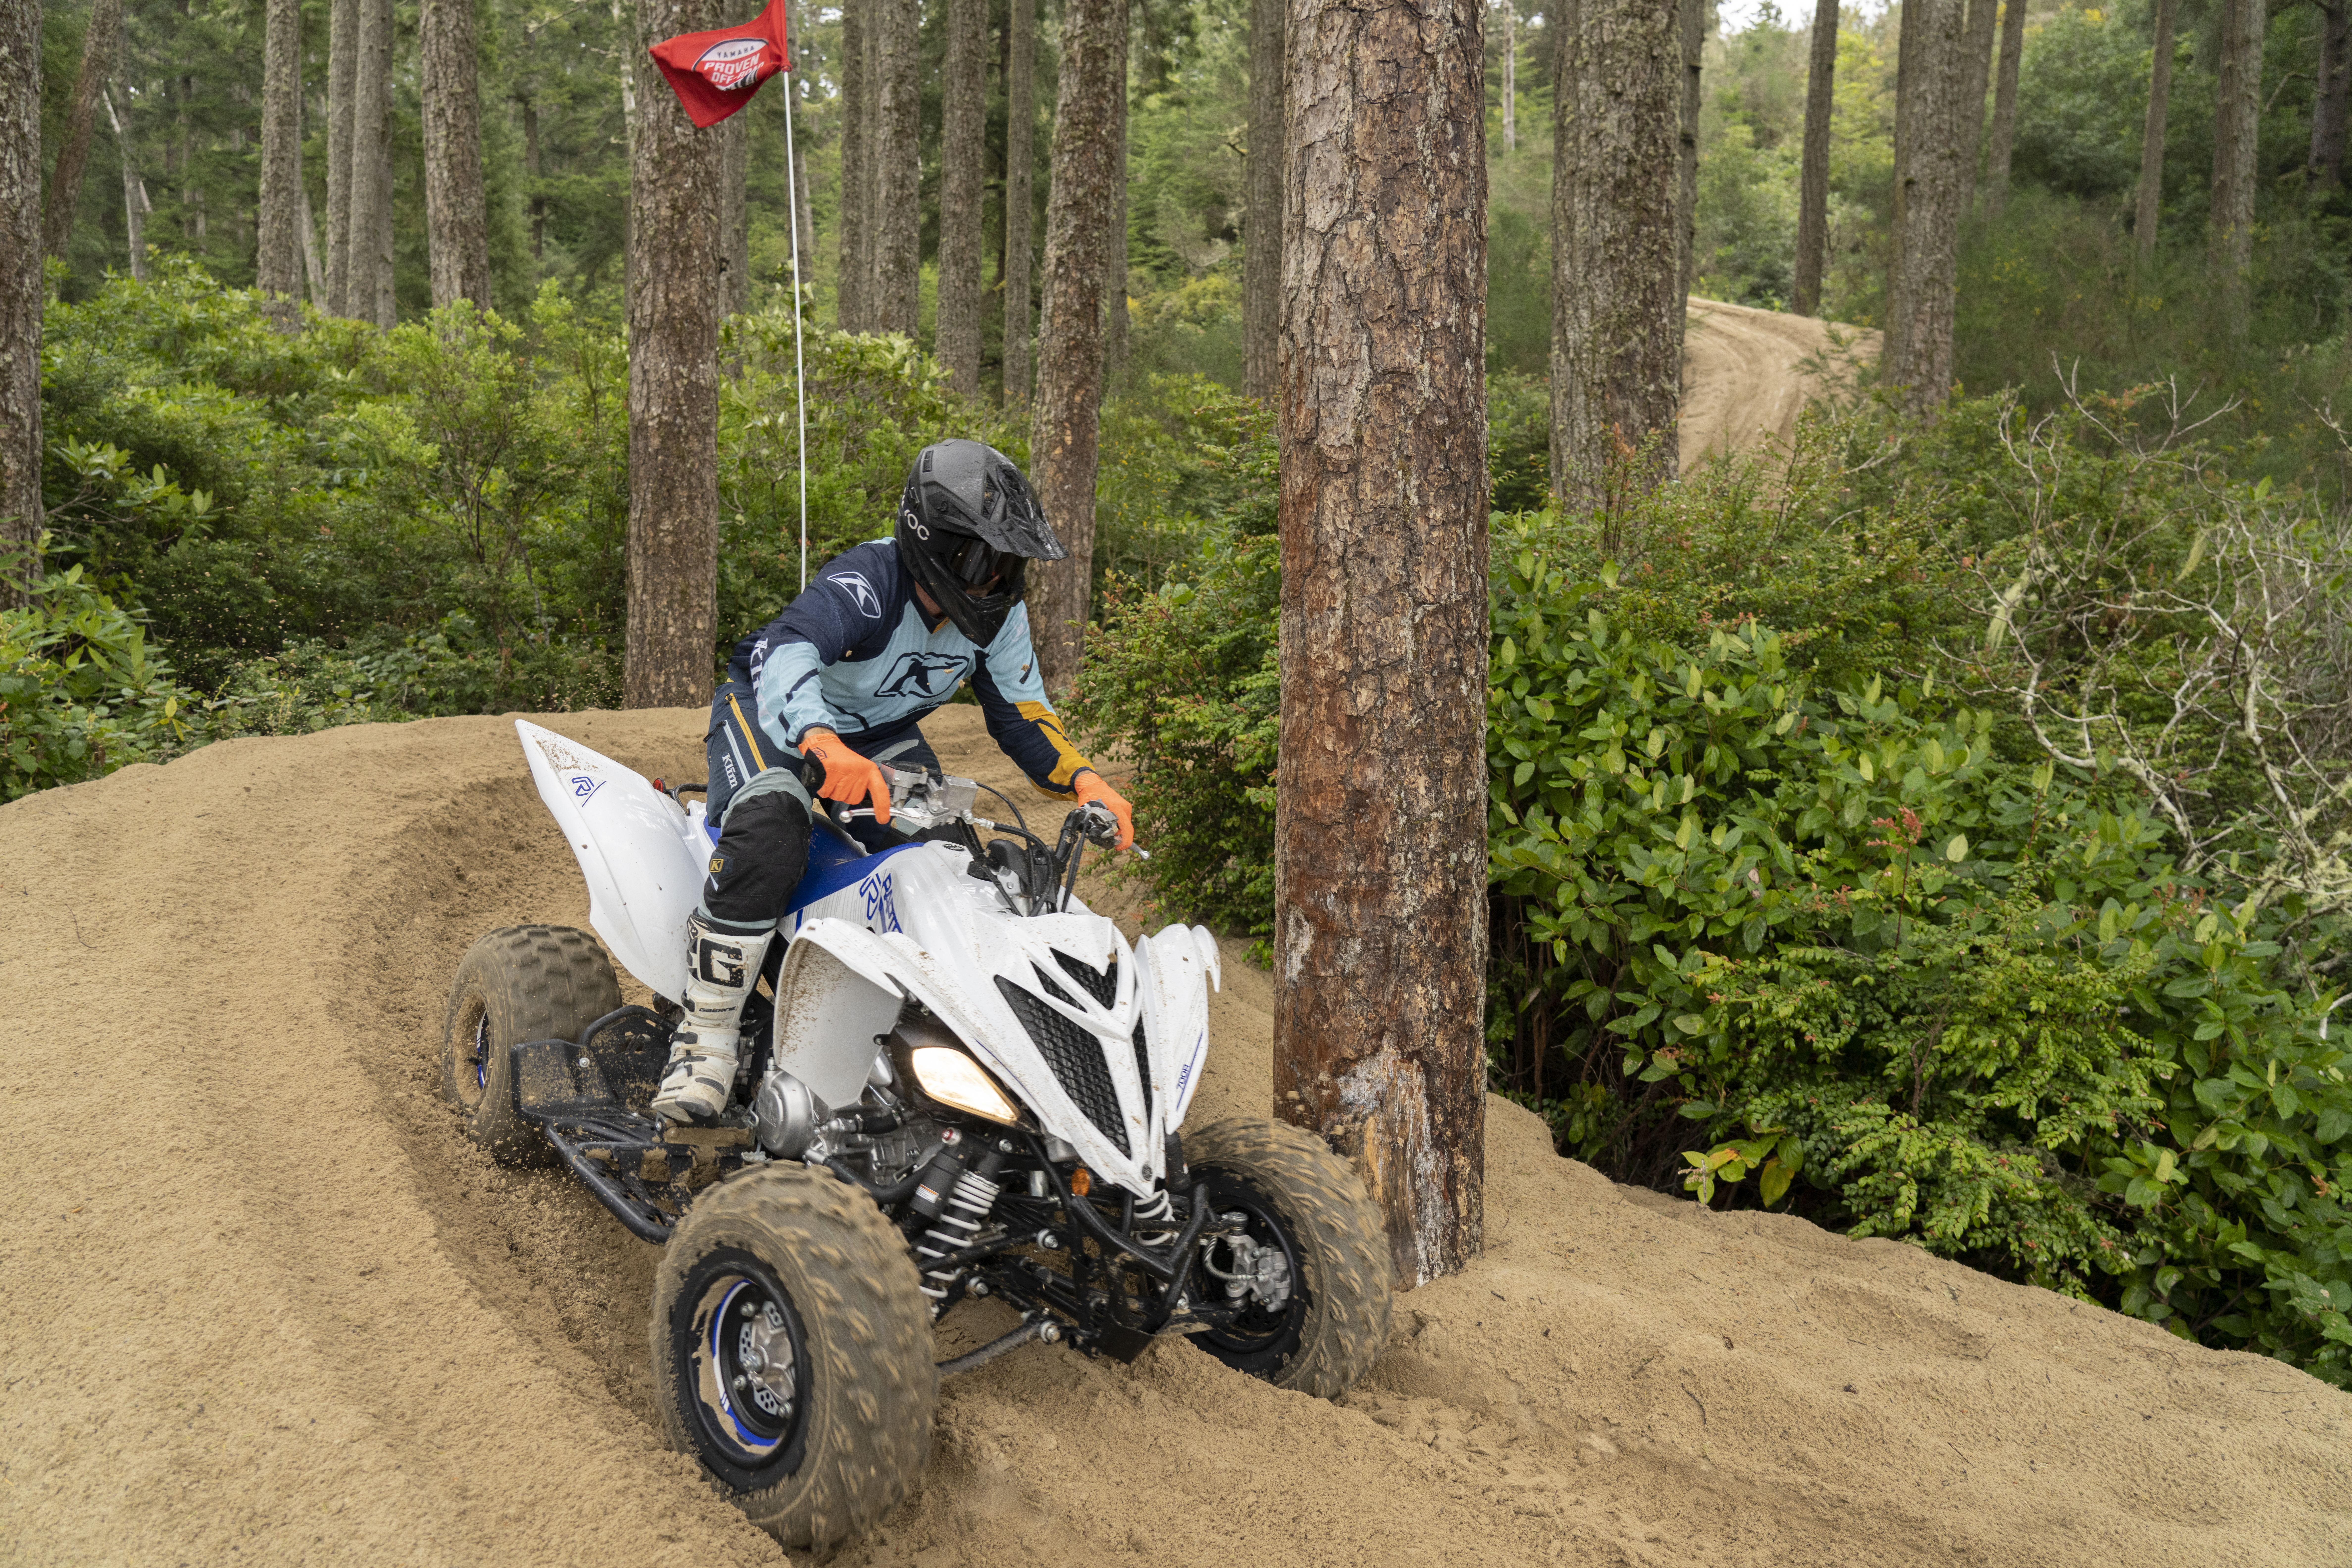 The Raptor 700R offers a clean ride.